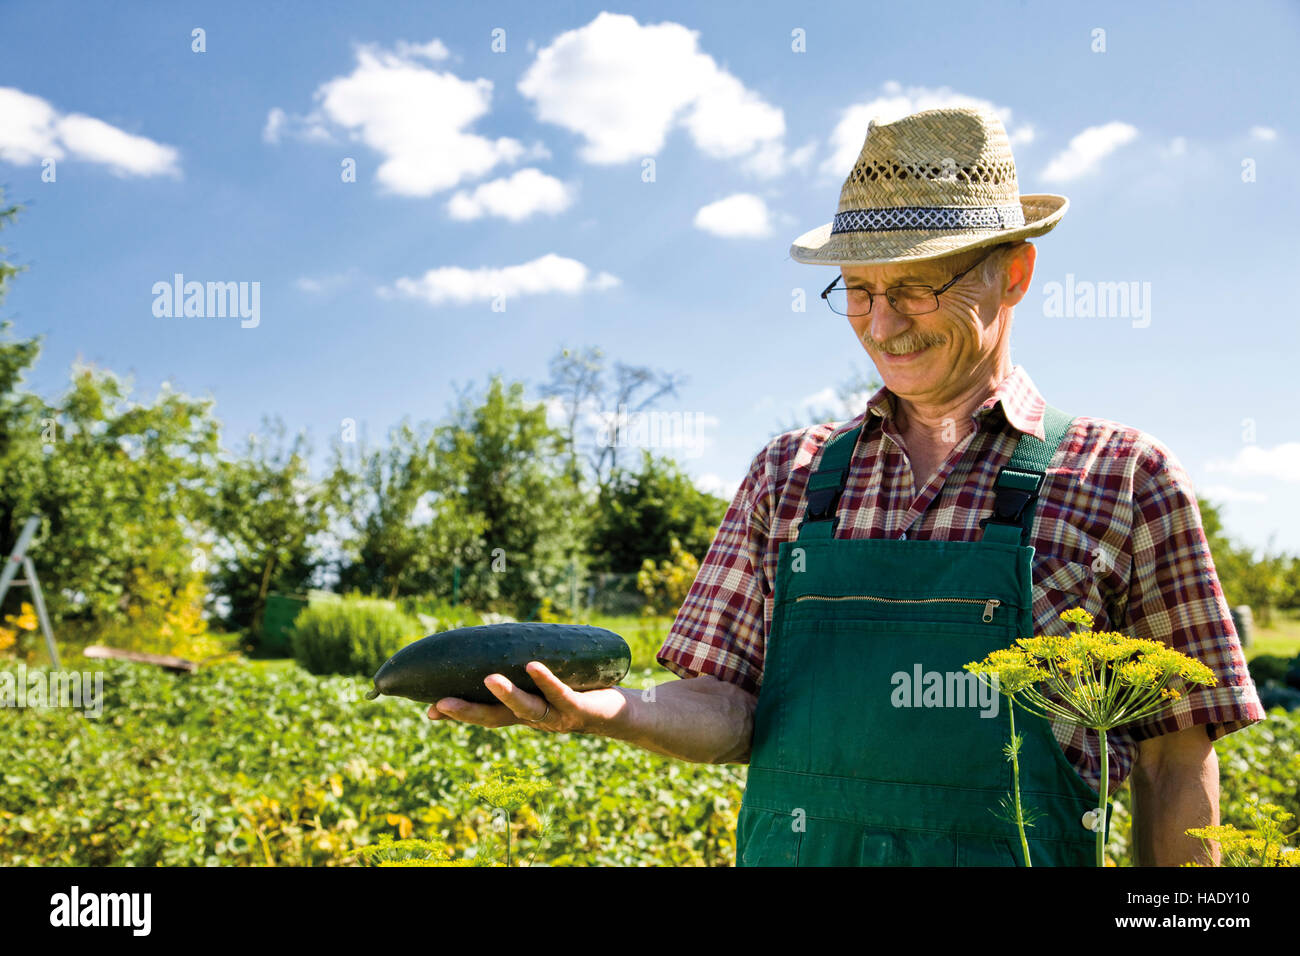 Proud gardener harvesting vegetables, holding a cucumber in his hands Stock Photo